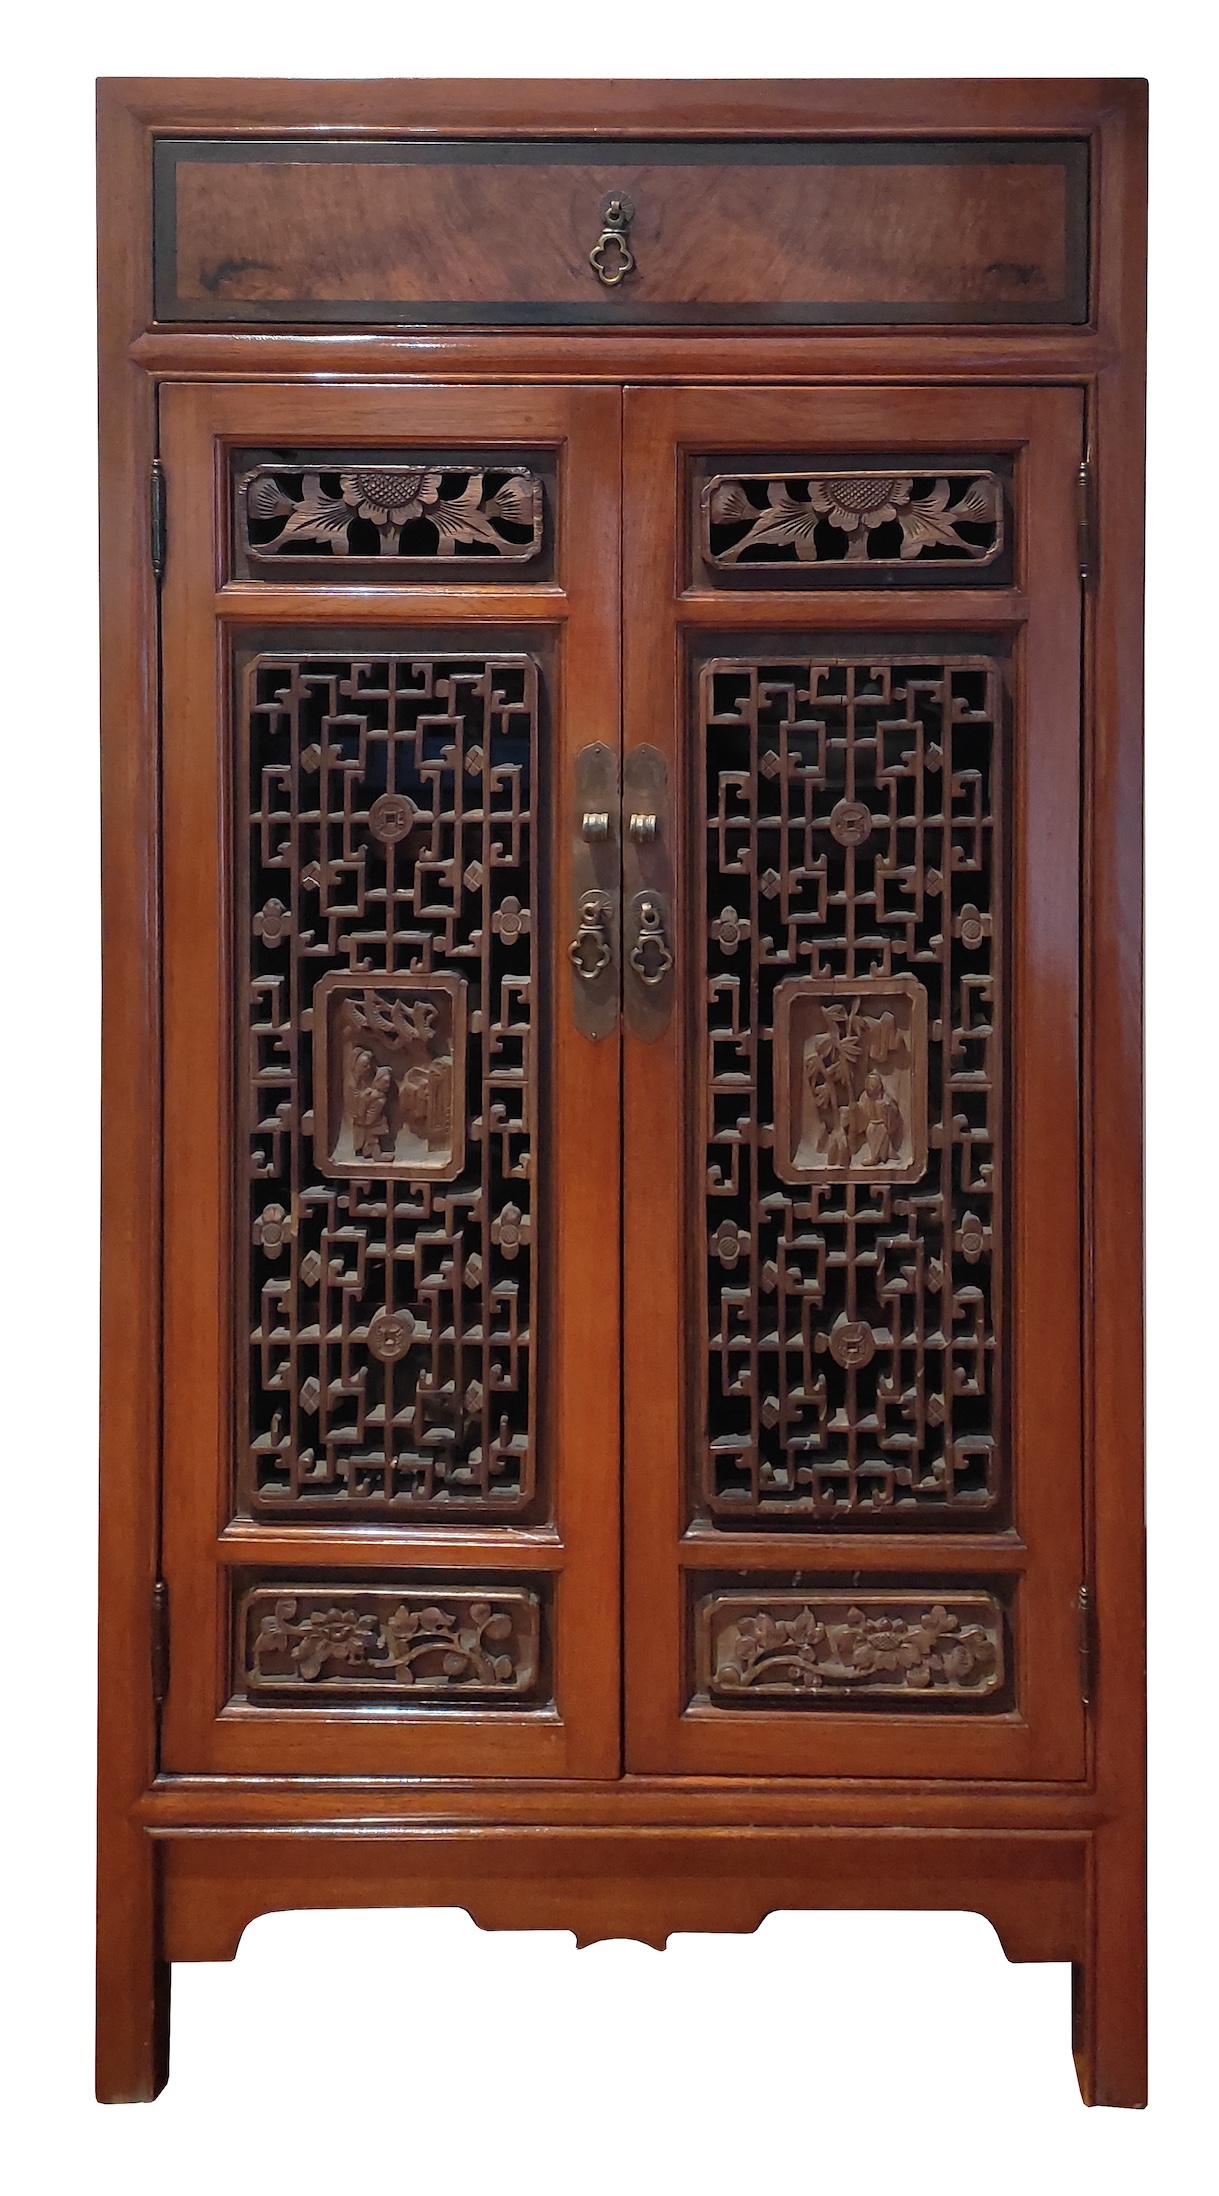 A Chinese carved wood cupboard with reticulated doors